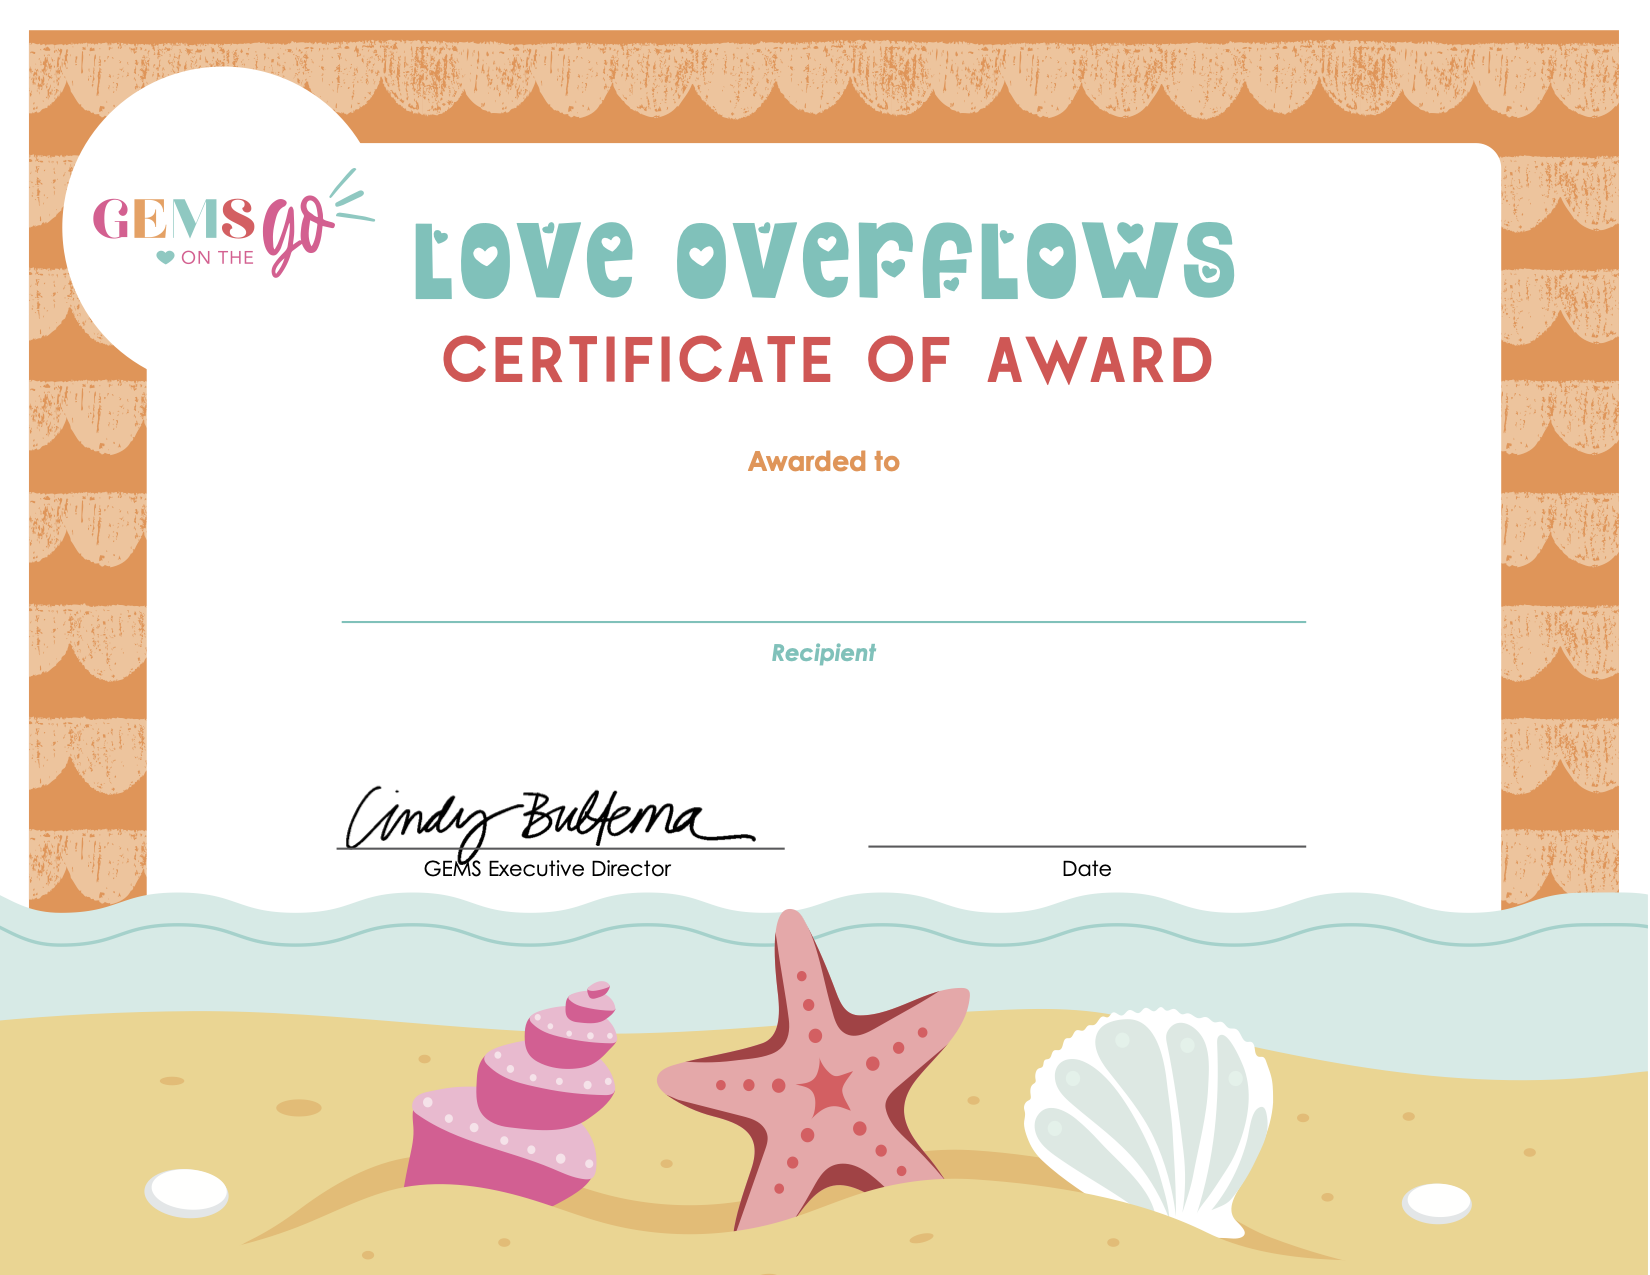 Love Overflows Badge and Certificate